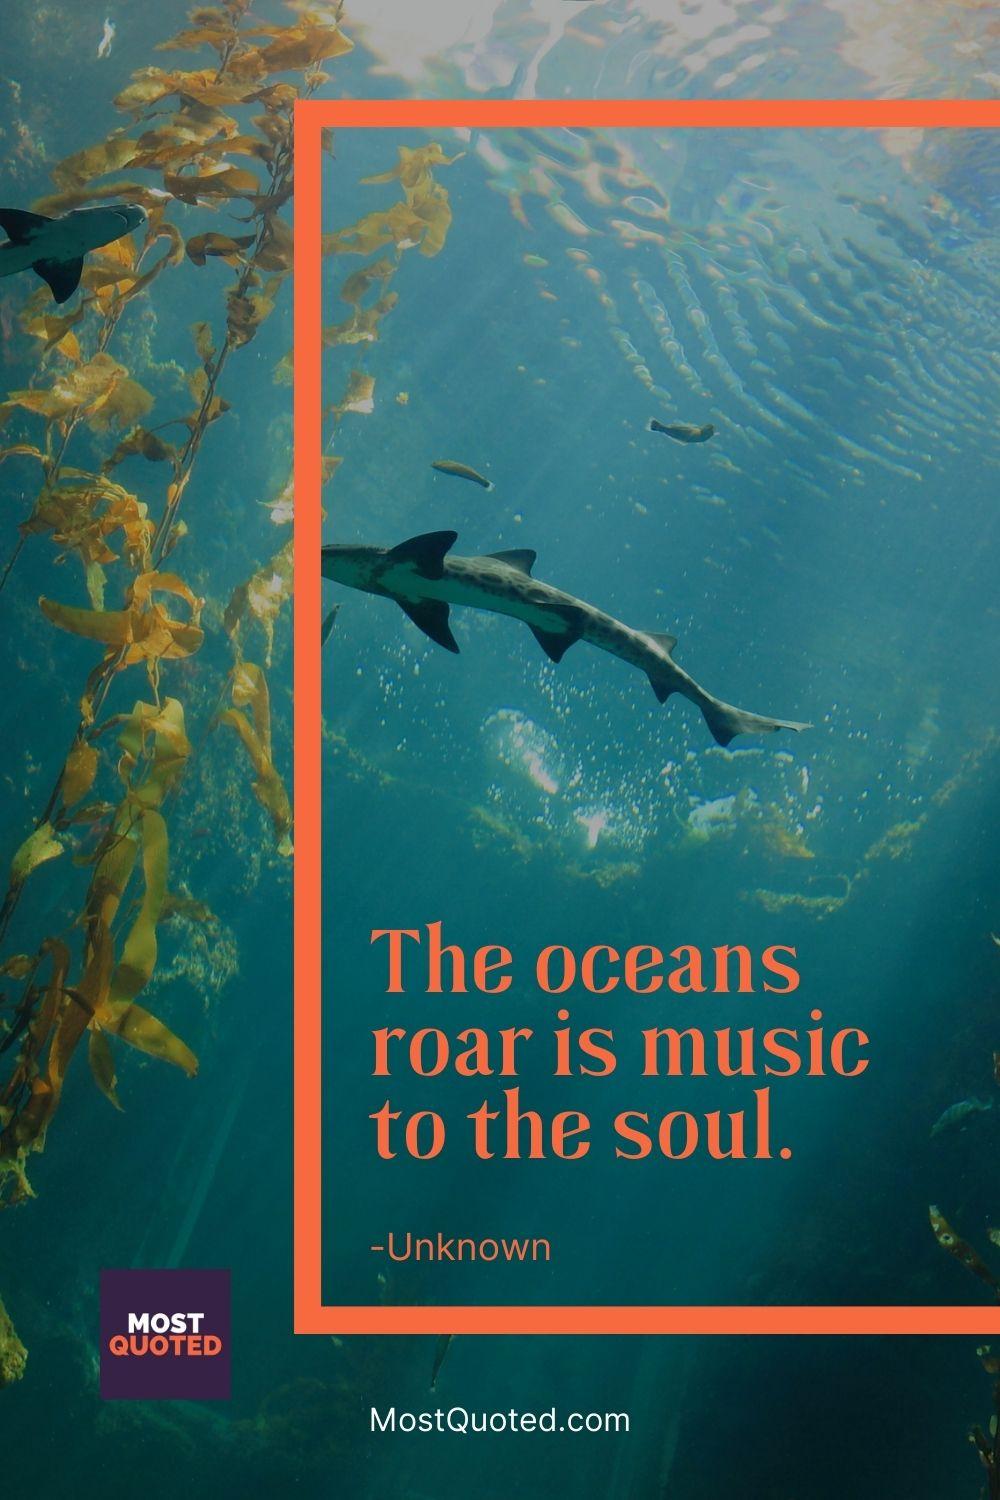 The oceans roar is music to the soul. - Unknown